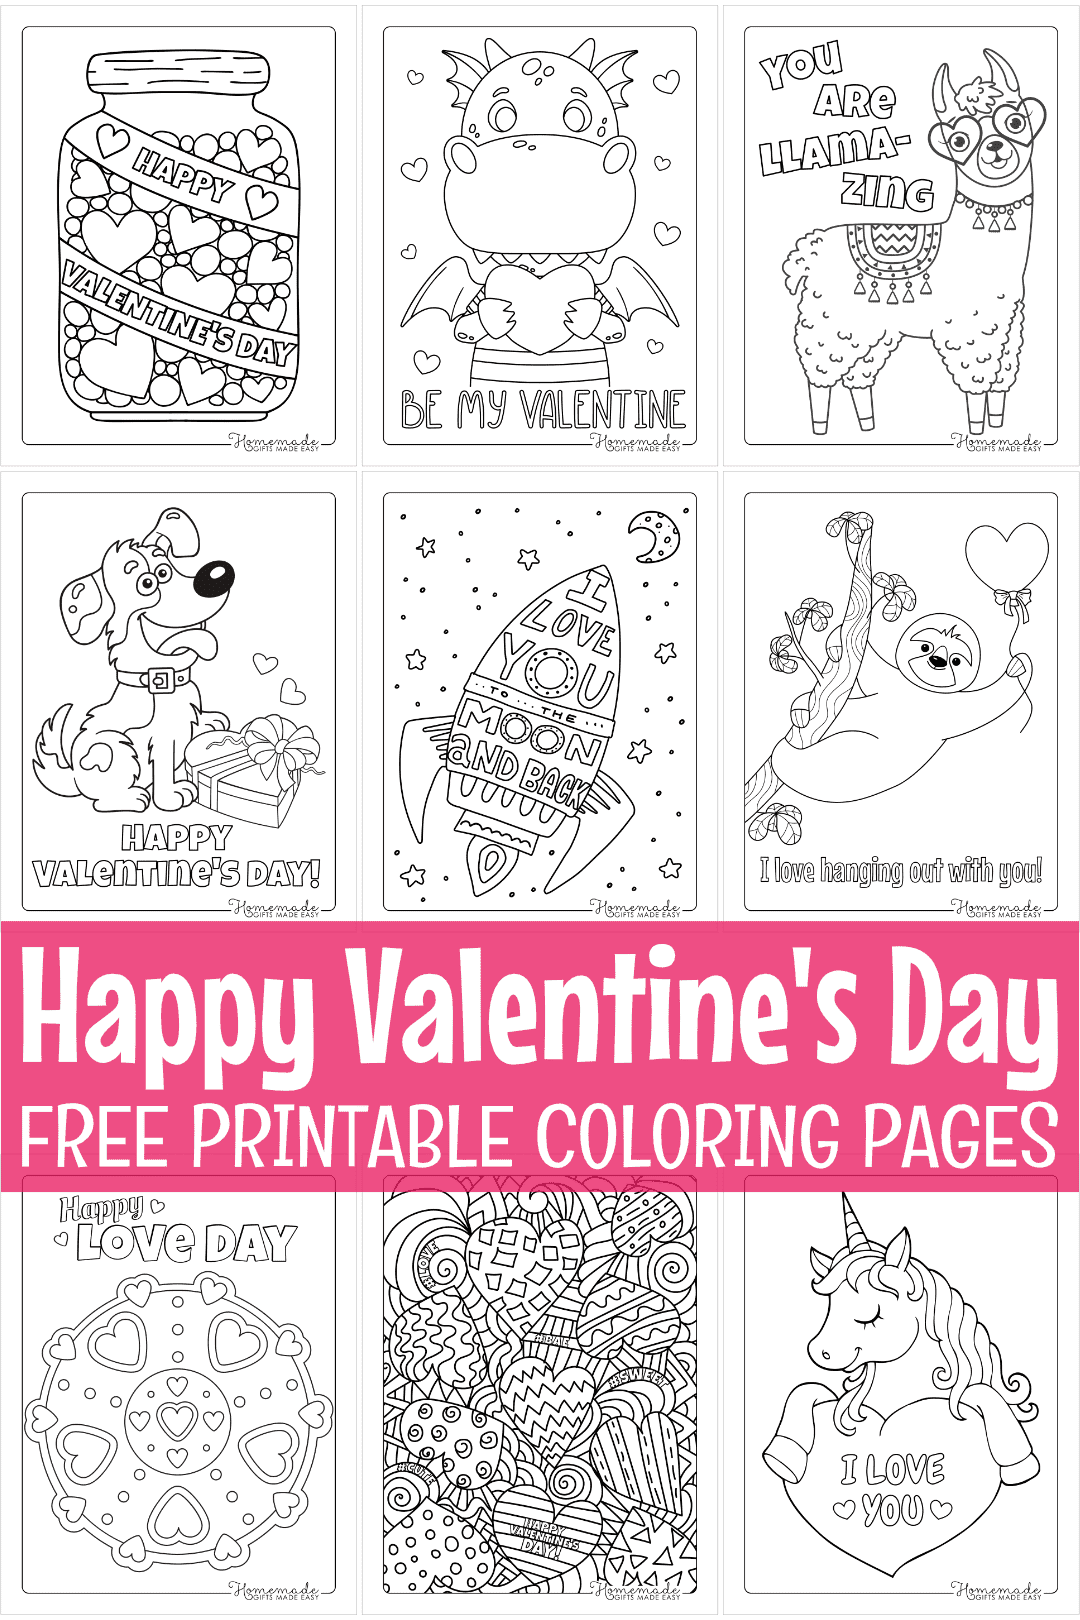 free printable Valentine's Day coloring pages